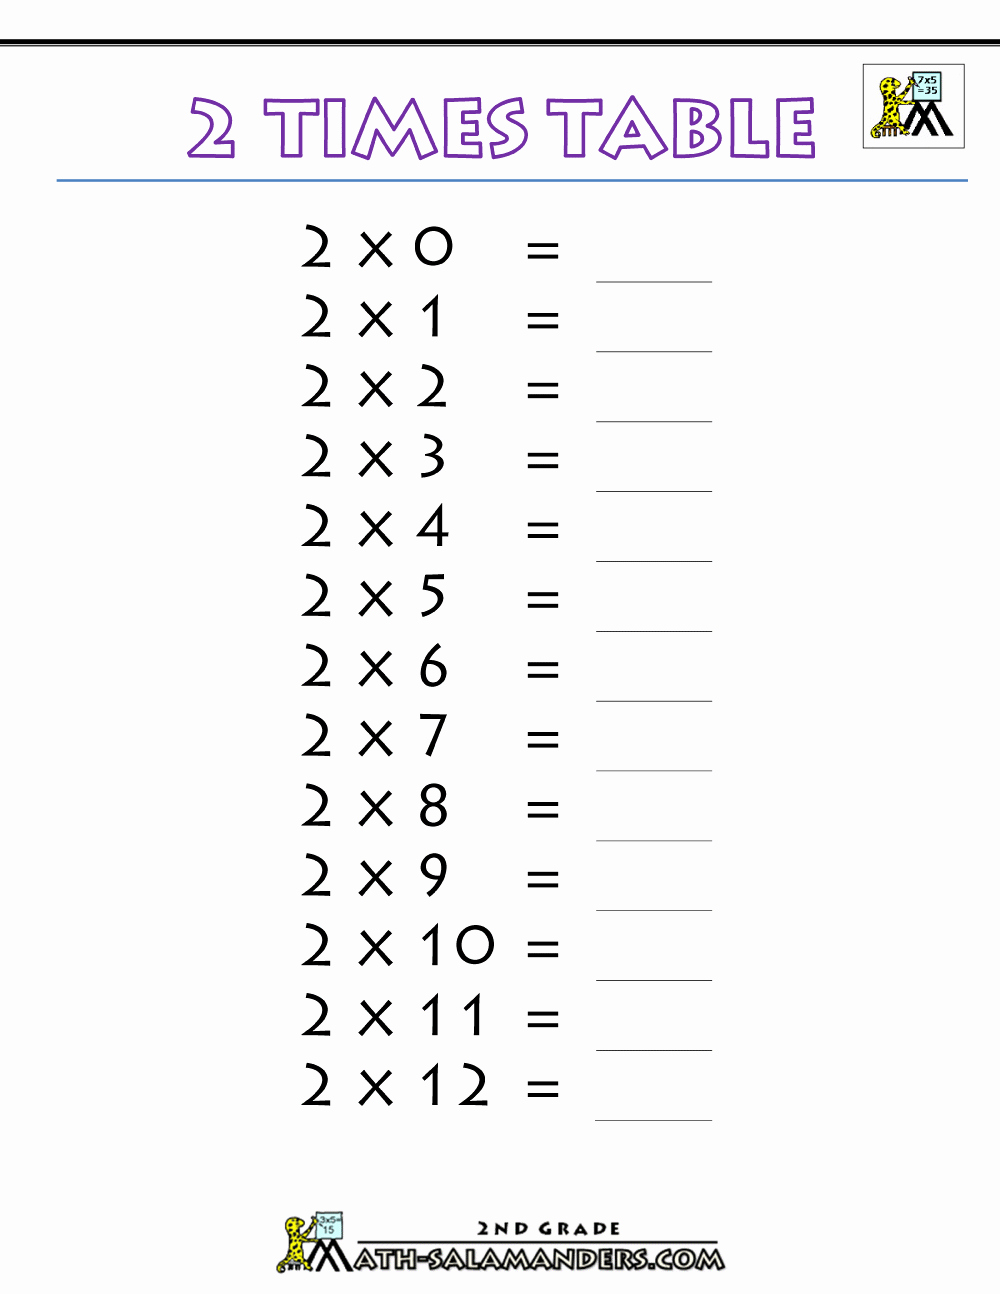 2 Times Table Worksheet Fresh 2 Times Table